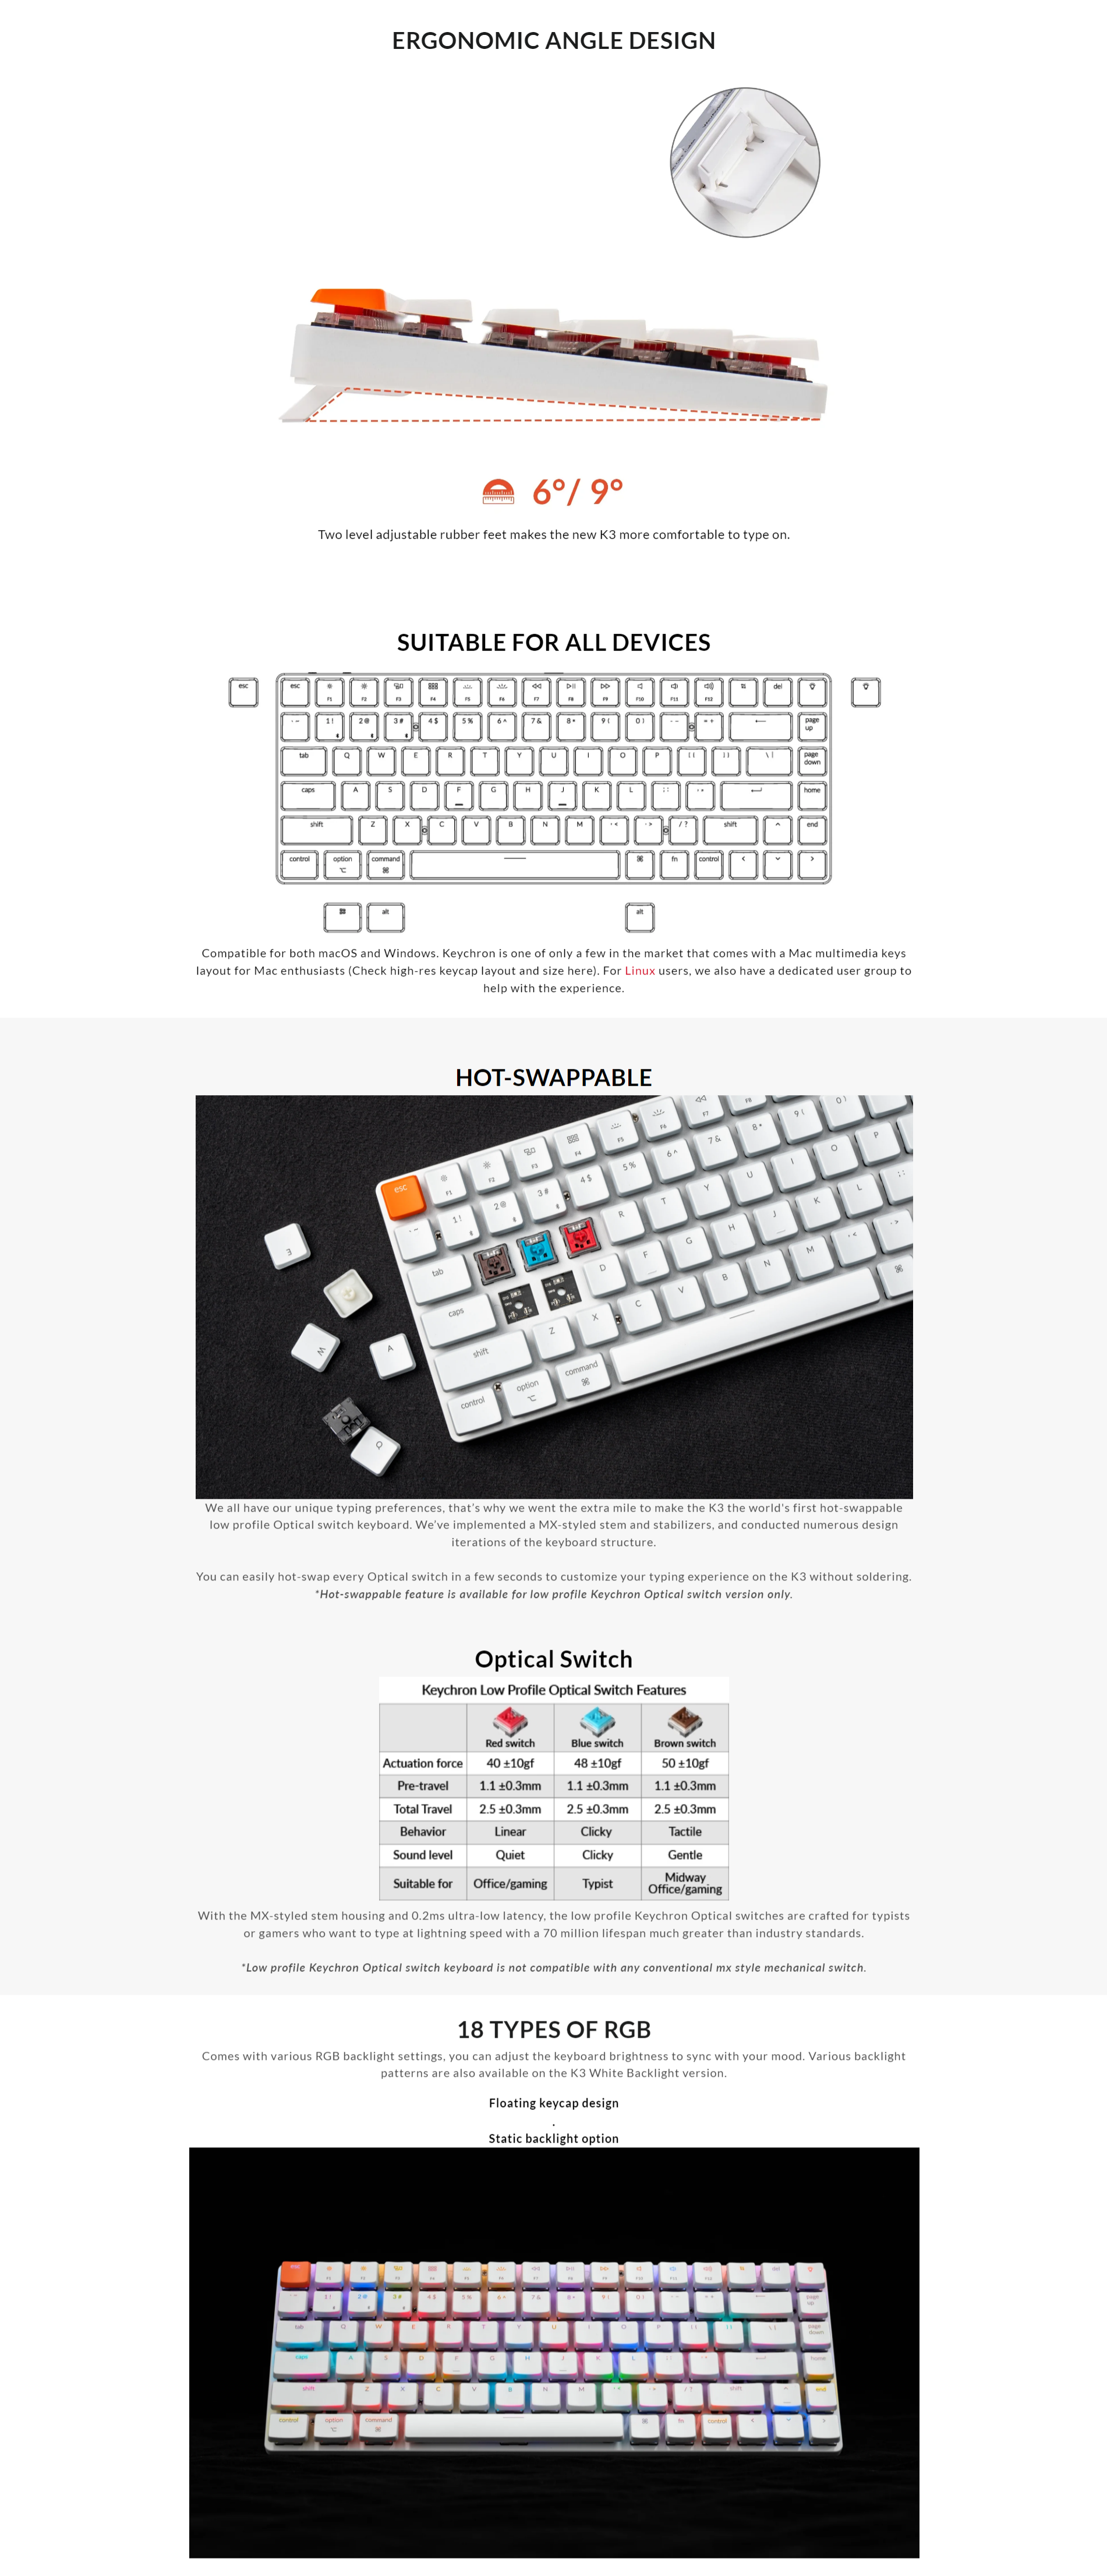 A large marketing image providing additional information about the product Keychron K3 V2 RGB Low Profile Hot-Swappable 75% Wireless Mechanical Keyboard - White (Blue Switch) - Additional alt info not provided